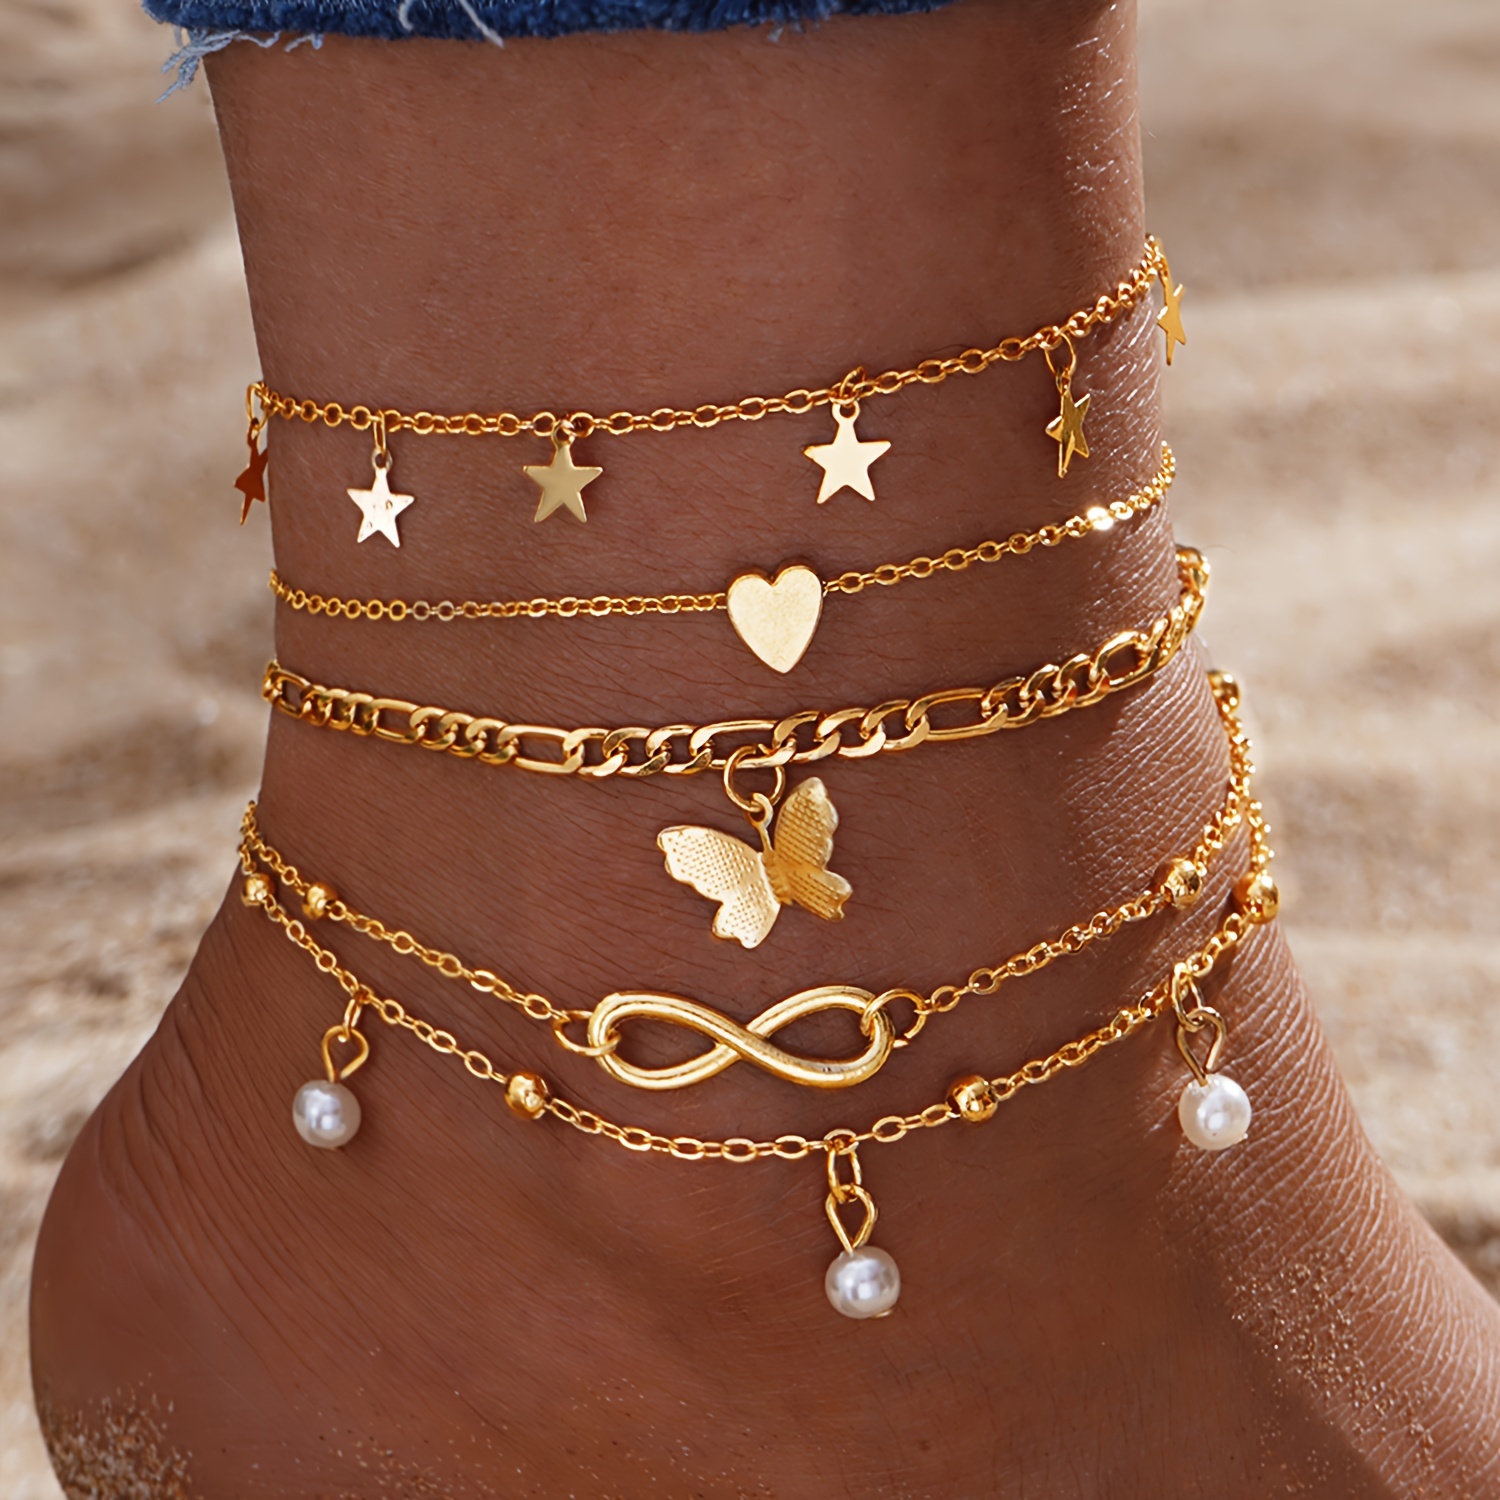 

4pc Mini Star Love Heart Butterfly Infinity Symbol Thin Chain Anklet Set Golden Color Alloy Ankle Bracelet Foot Accessory Decoration